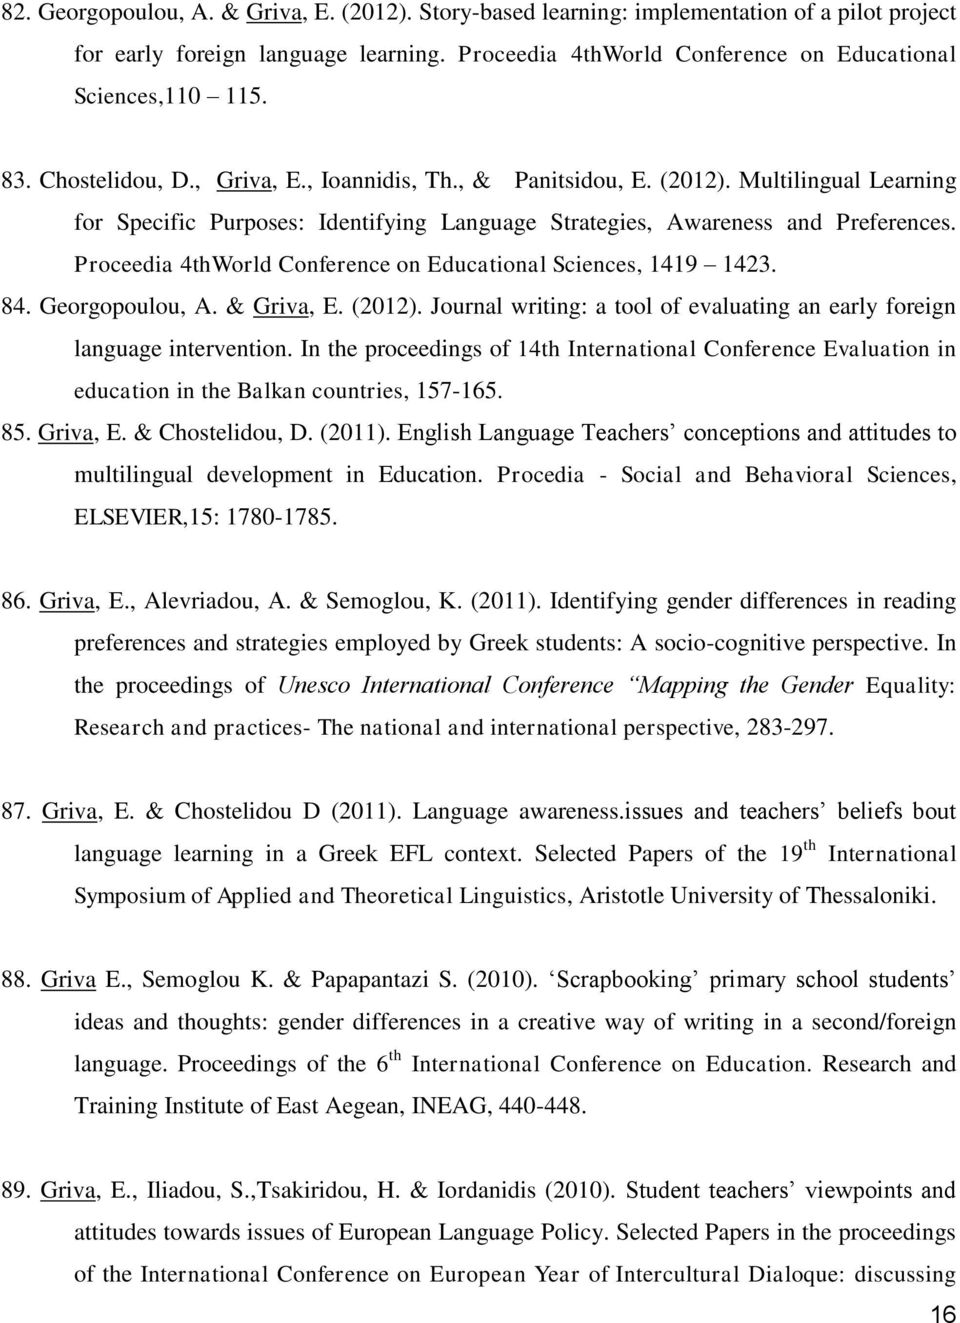 Proceedia 4thWorld Conference on Educational Sciences, 1419 1423. 84. Georgopoulou, A. & Griva, E. (2012). Journal writing: a tool of evaluating an early foreign language intervention.